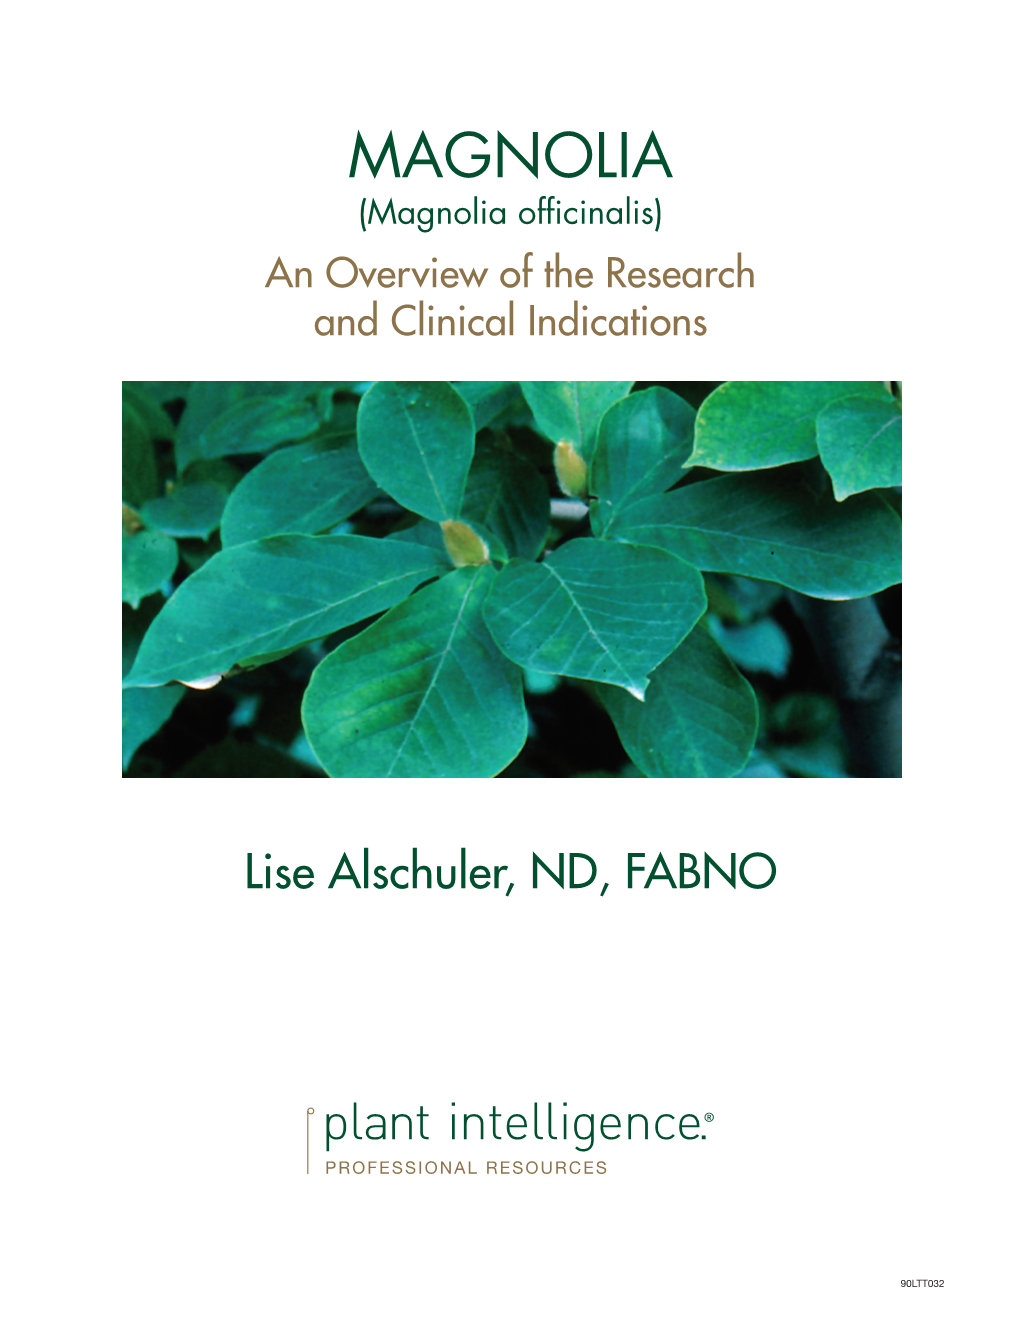 MAGNOLIA (Magnolia Officinalis) an Overview of the Research and Clinical Indications